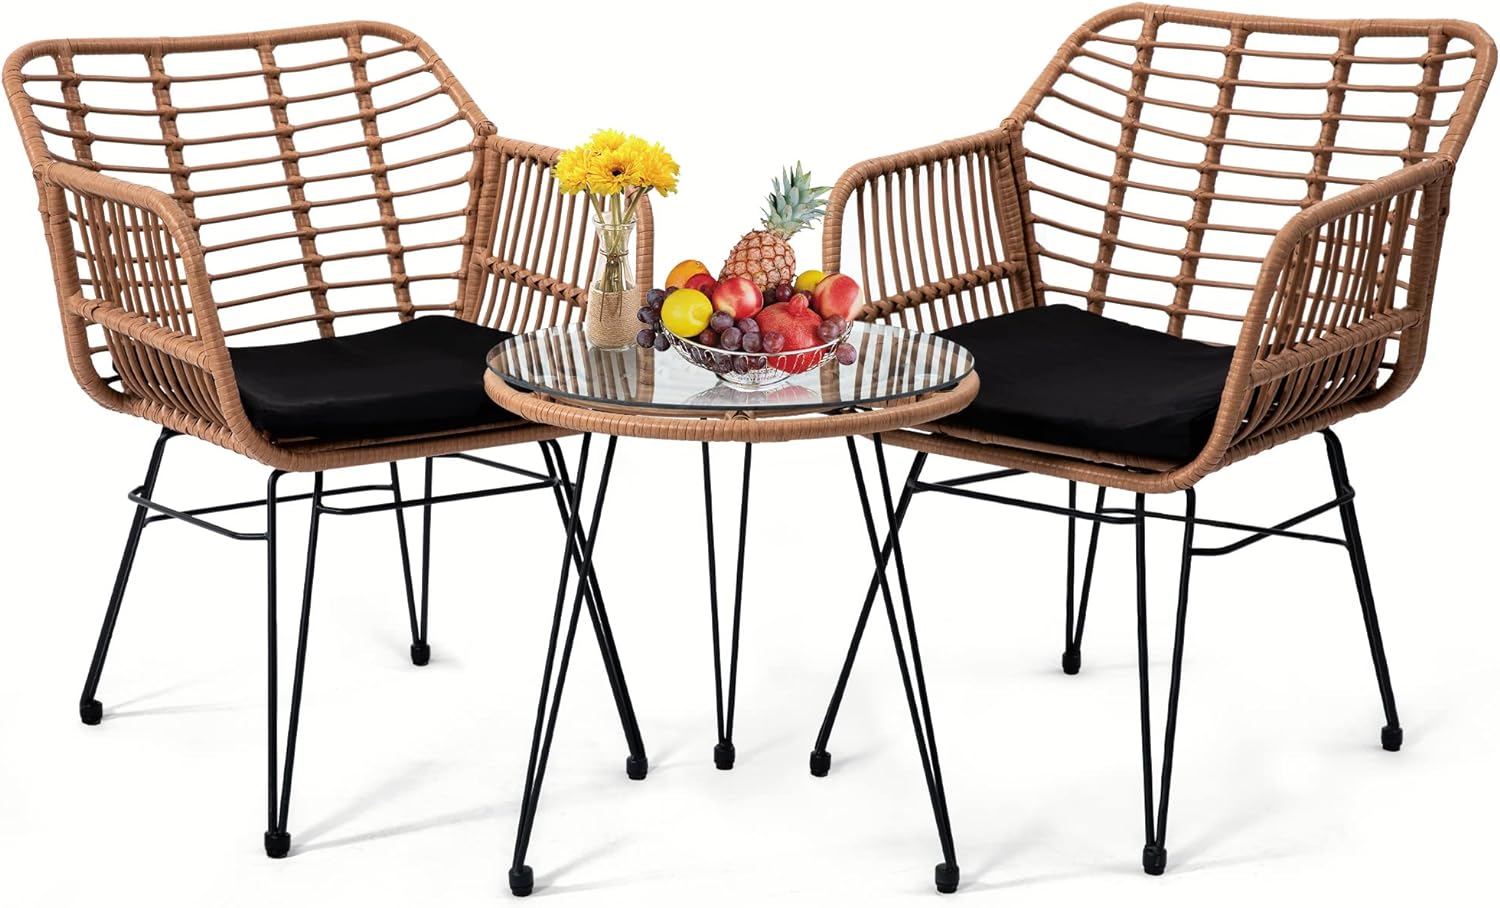 3 Pieces Wicker Patio Bistro Furniture Set, Includes 2 Chairs and Glass Top Table, Ideal for Porch, Outdoor, Backyard, Apartment, Balcony Natural Color